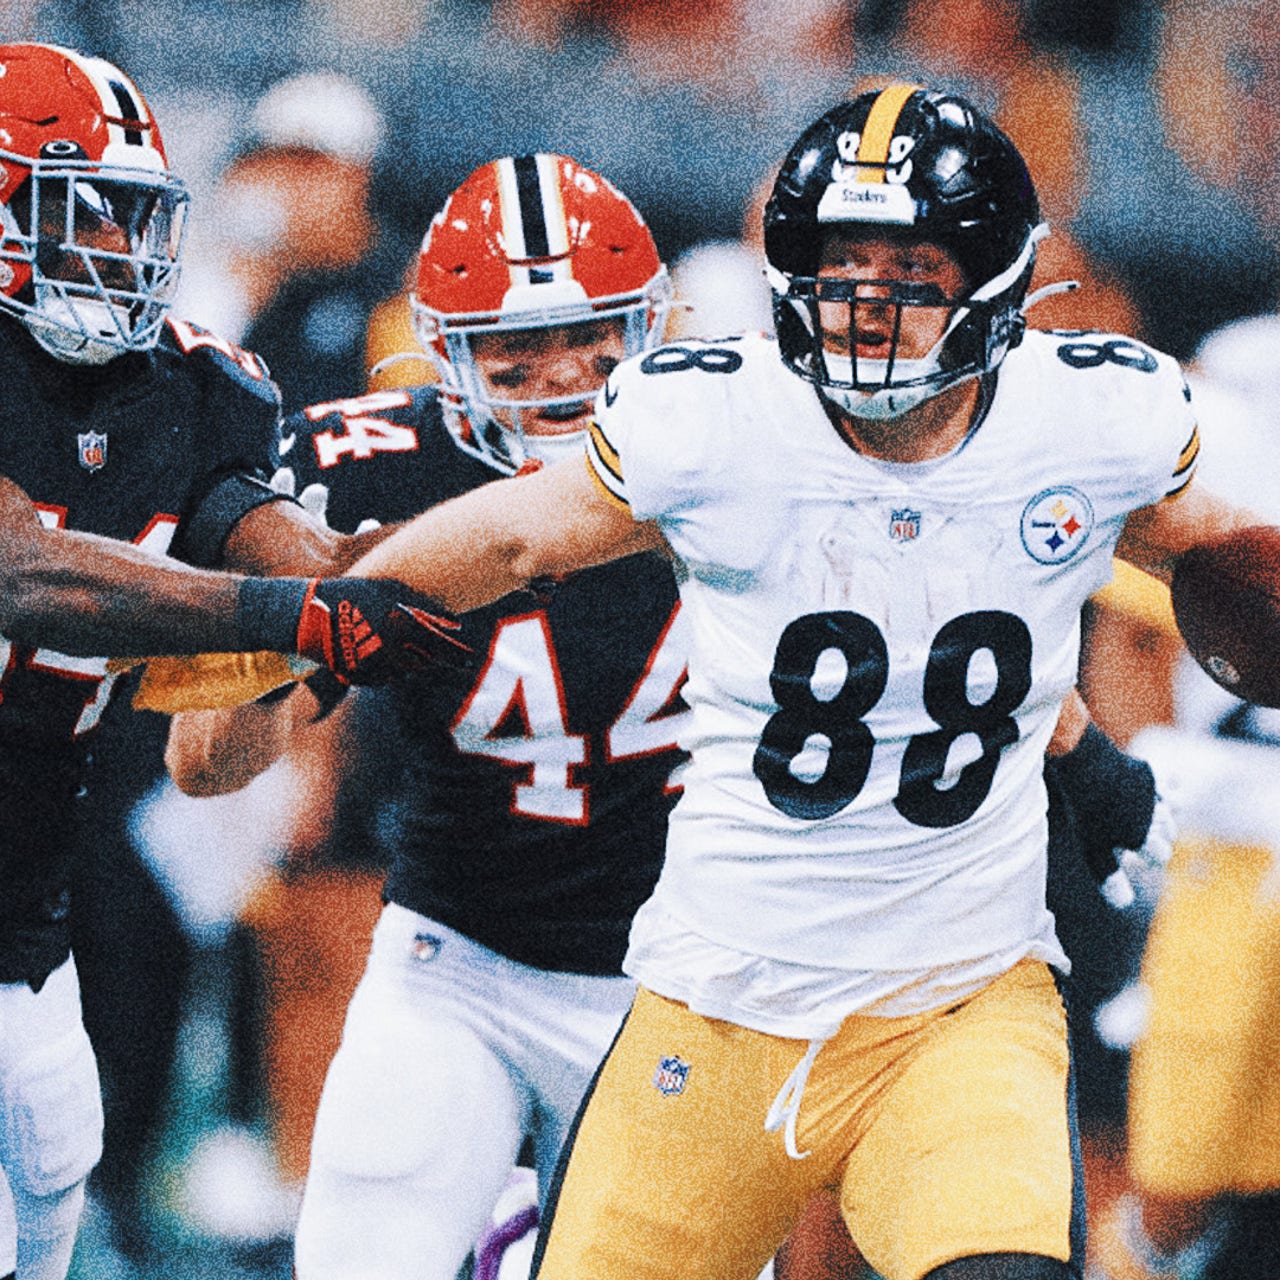 Gregg Rosenthal makes game pick for Steelers-Browns on 'TNF'